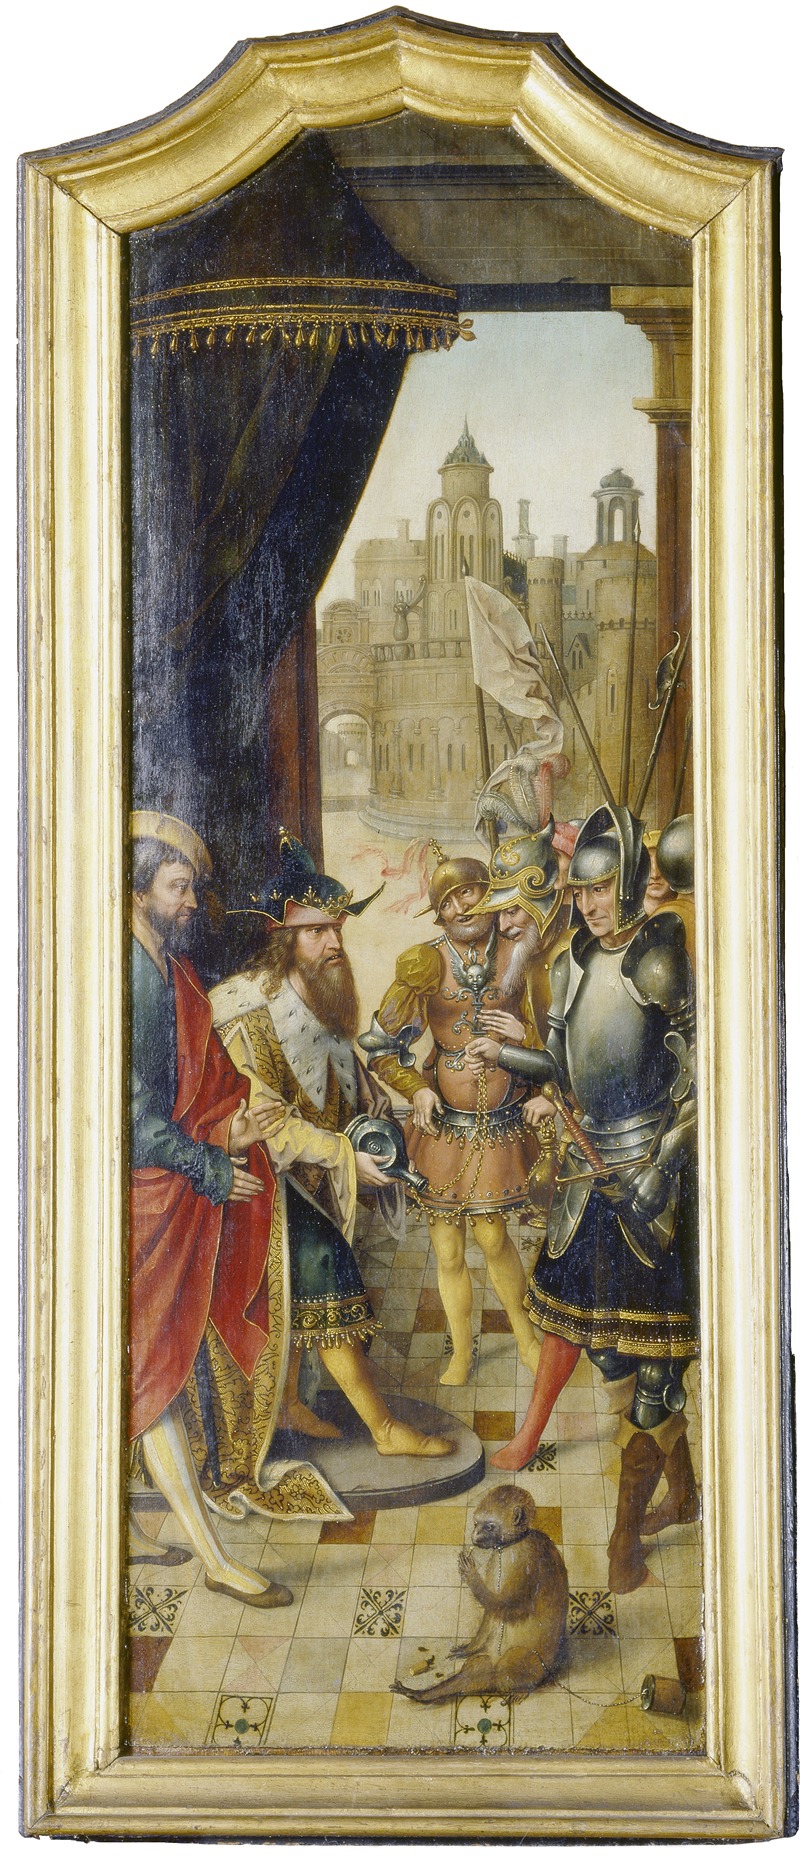 Master of the von Groote Adoration - King David Receiving the Cistern Water of Bethlehem